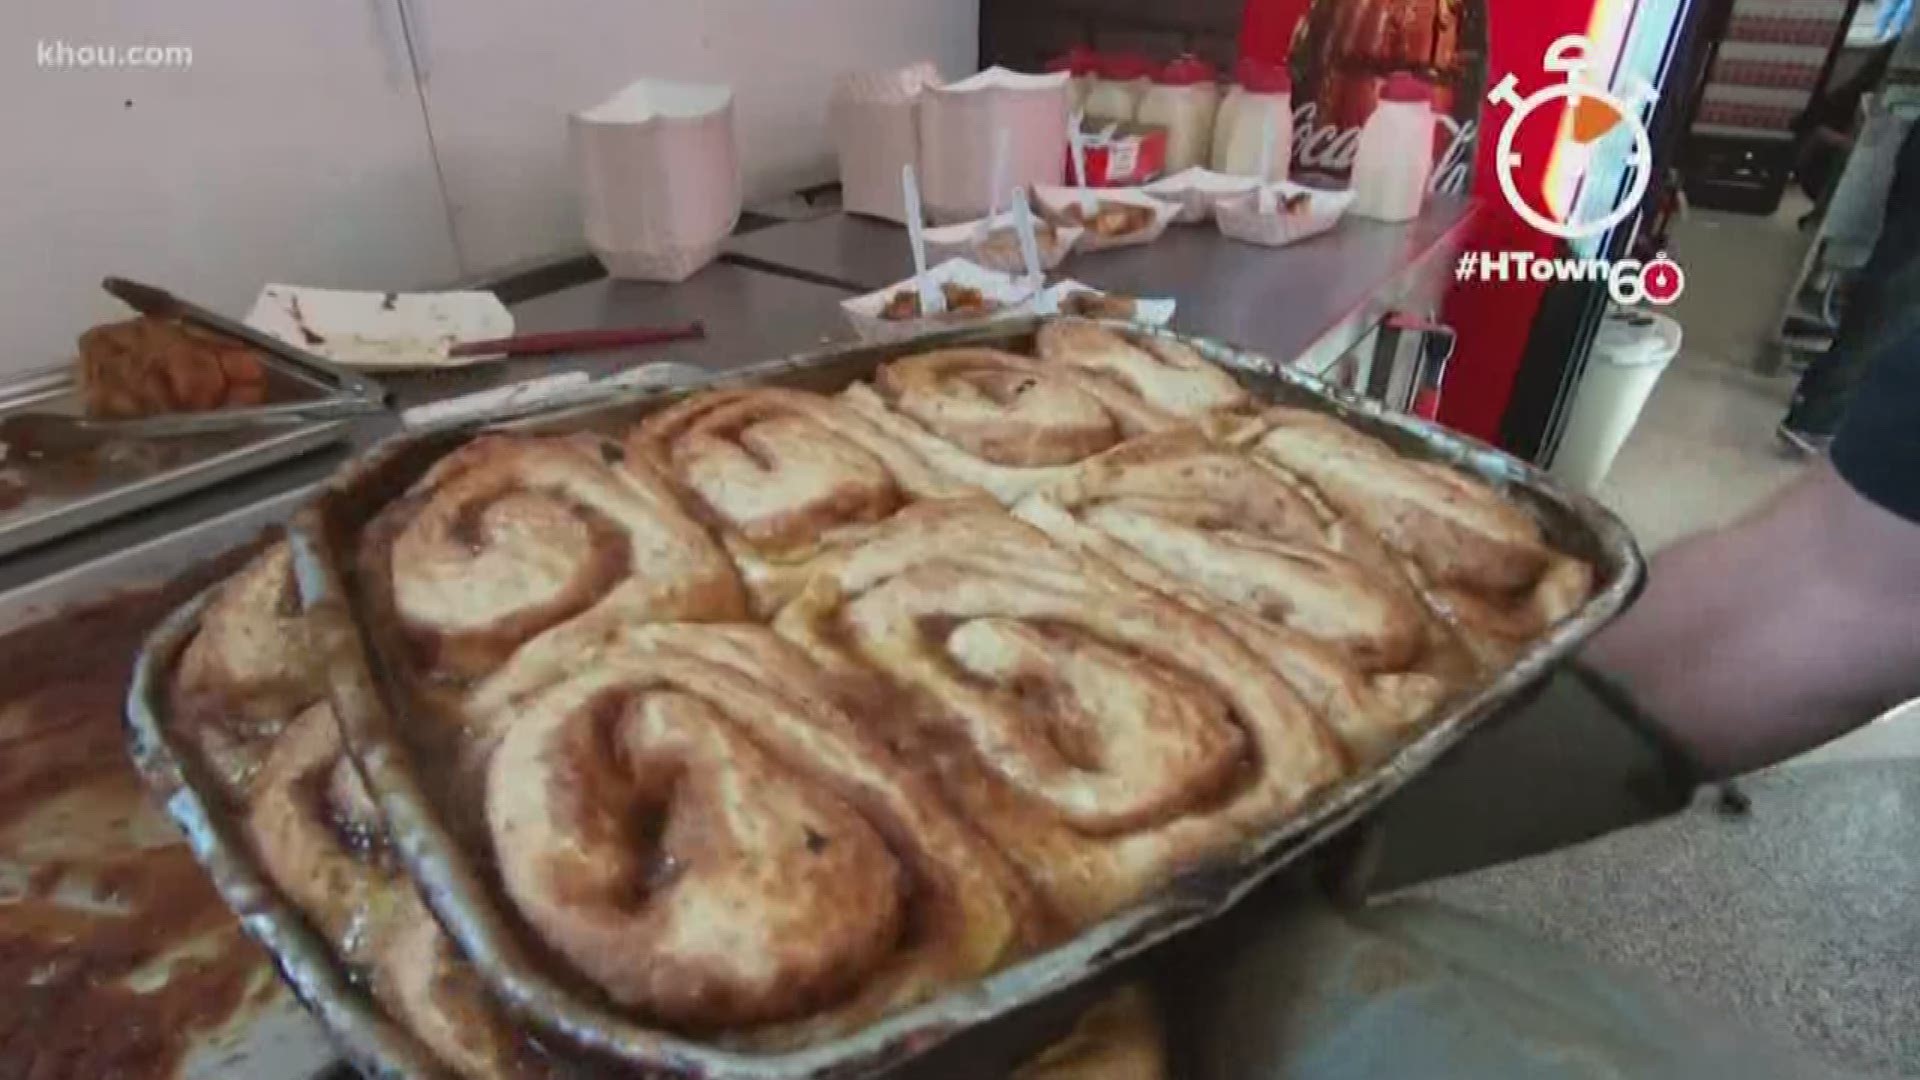 You'll find plenty of sweet treats at the rodeo, but this morning we're checking out a fan favorite. Brandi Smith is tasting Stubby's Cinnamon Rolls in your HTown60.